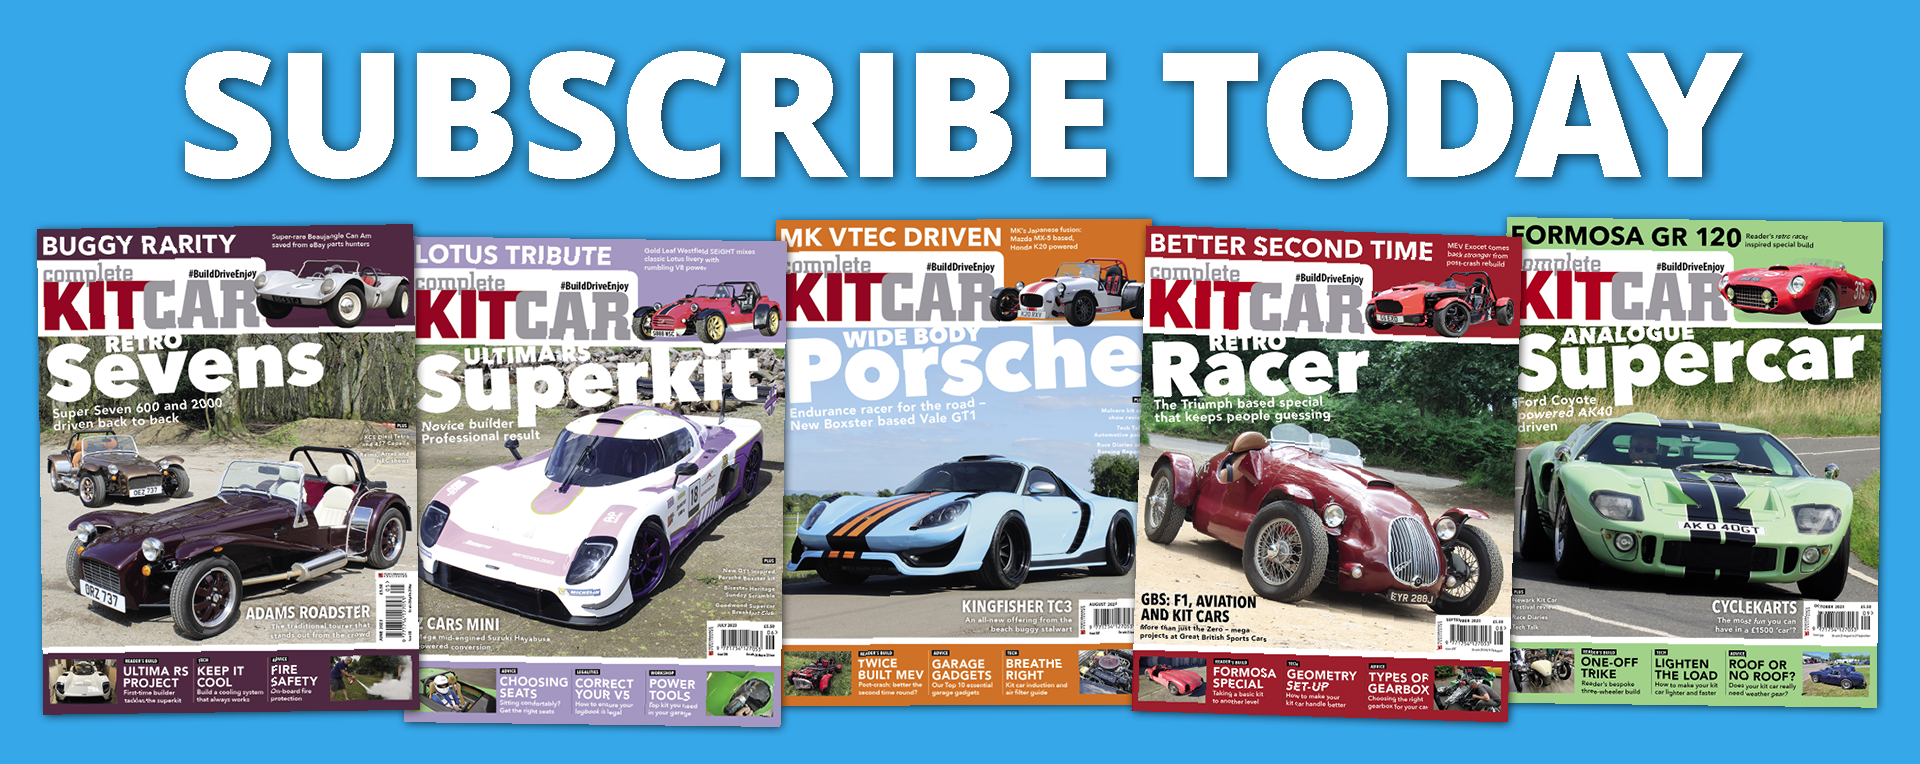 Subscribe to Complete Kit Car